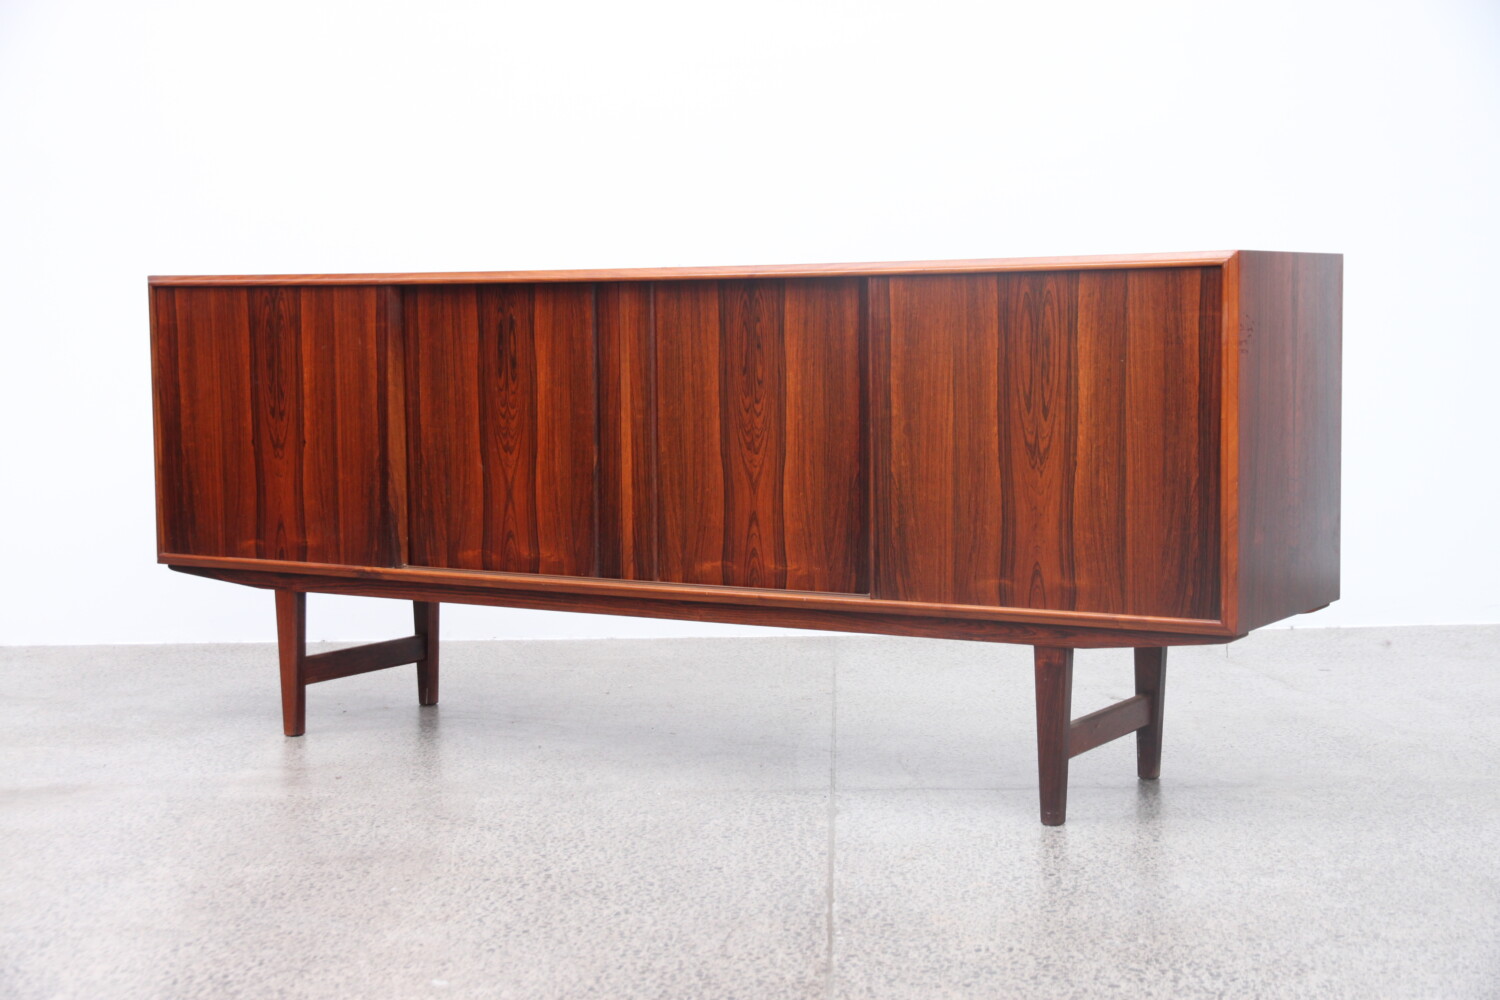 Rosewood Sideboard by E.W Bach sold